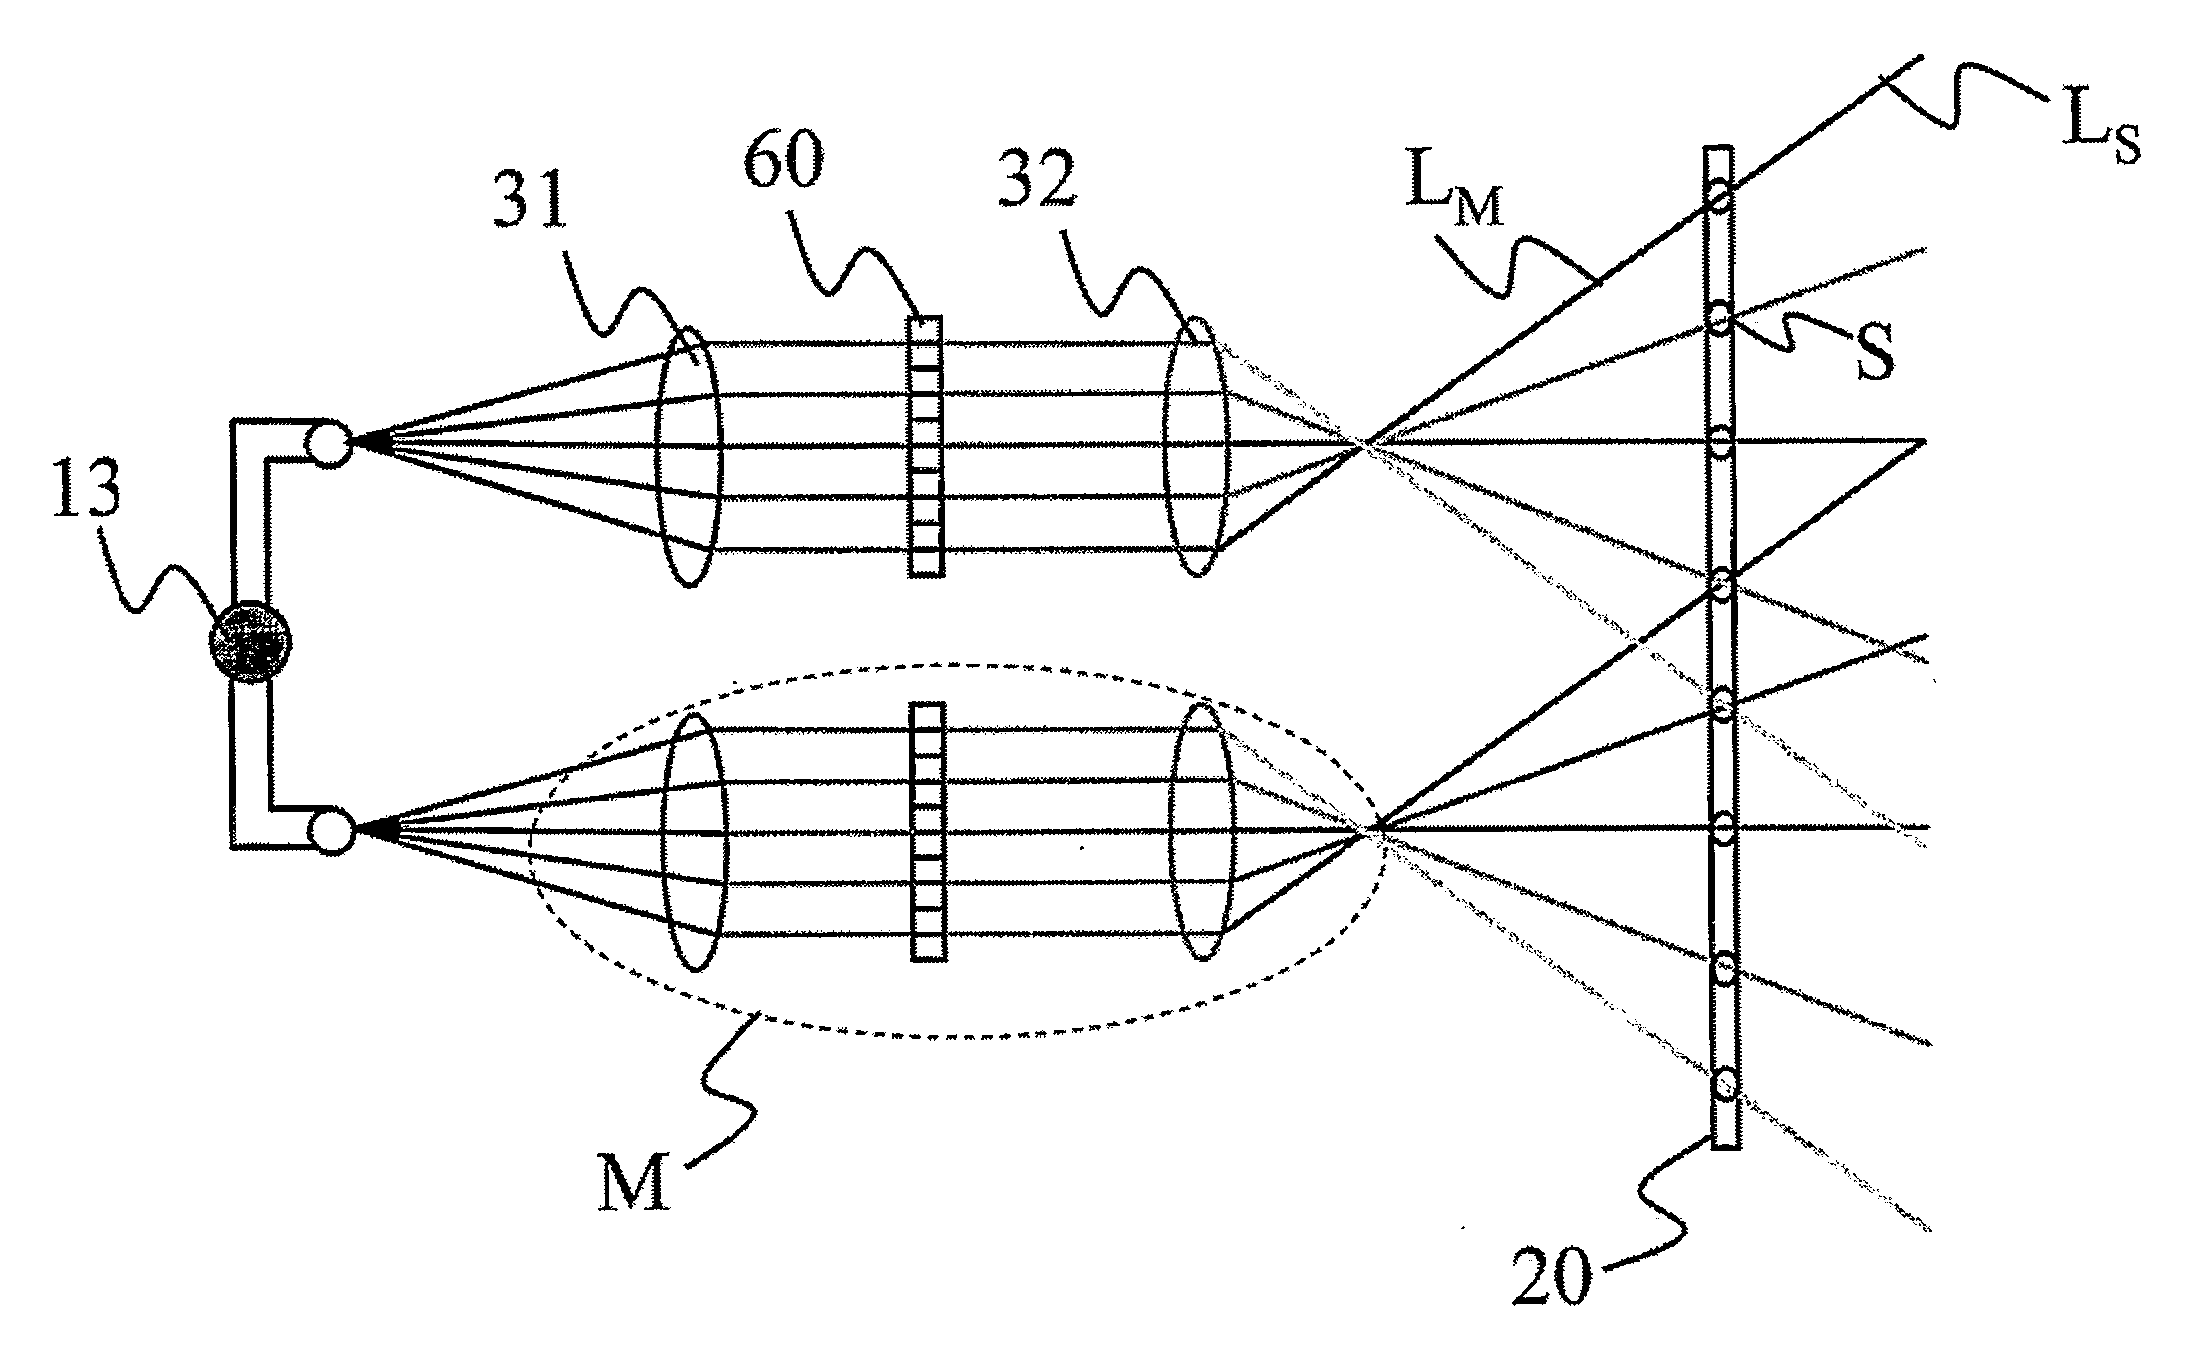 Apparatus for Displaying 3D Images